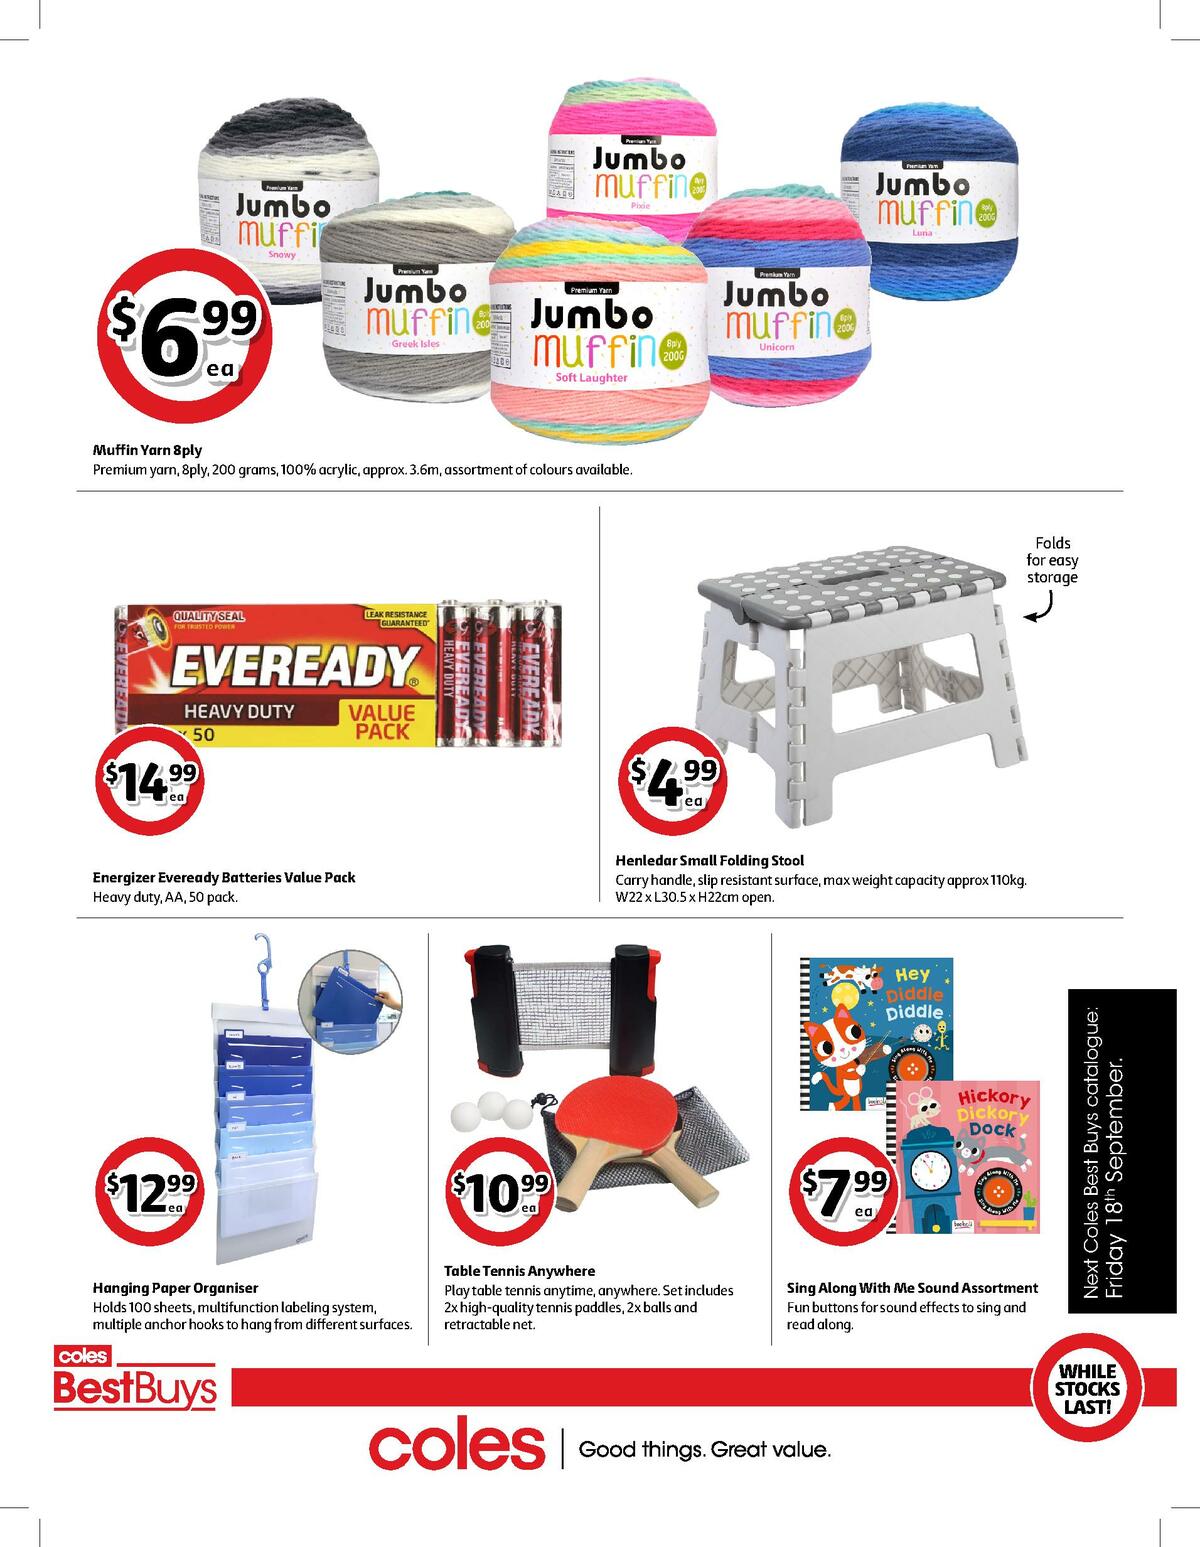 Coles Best Buys Catalogues from 4 September